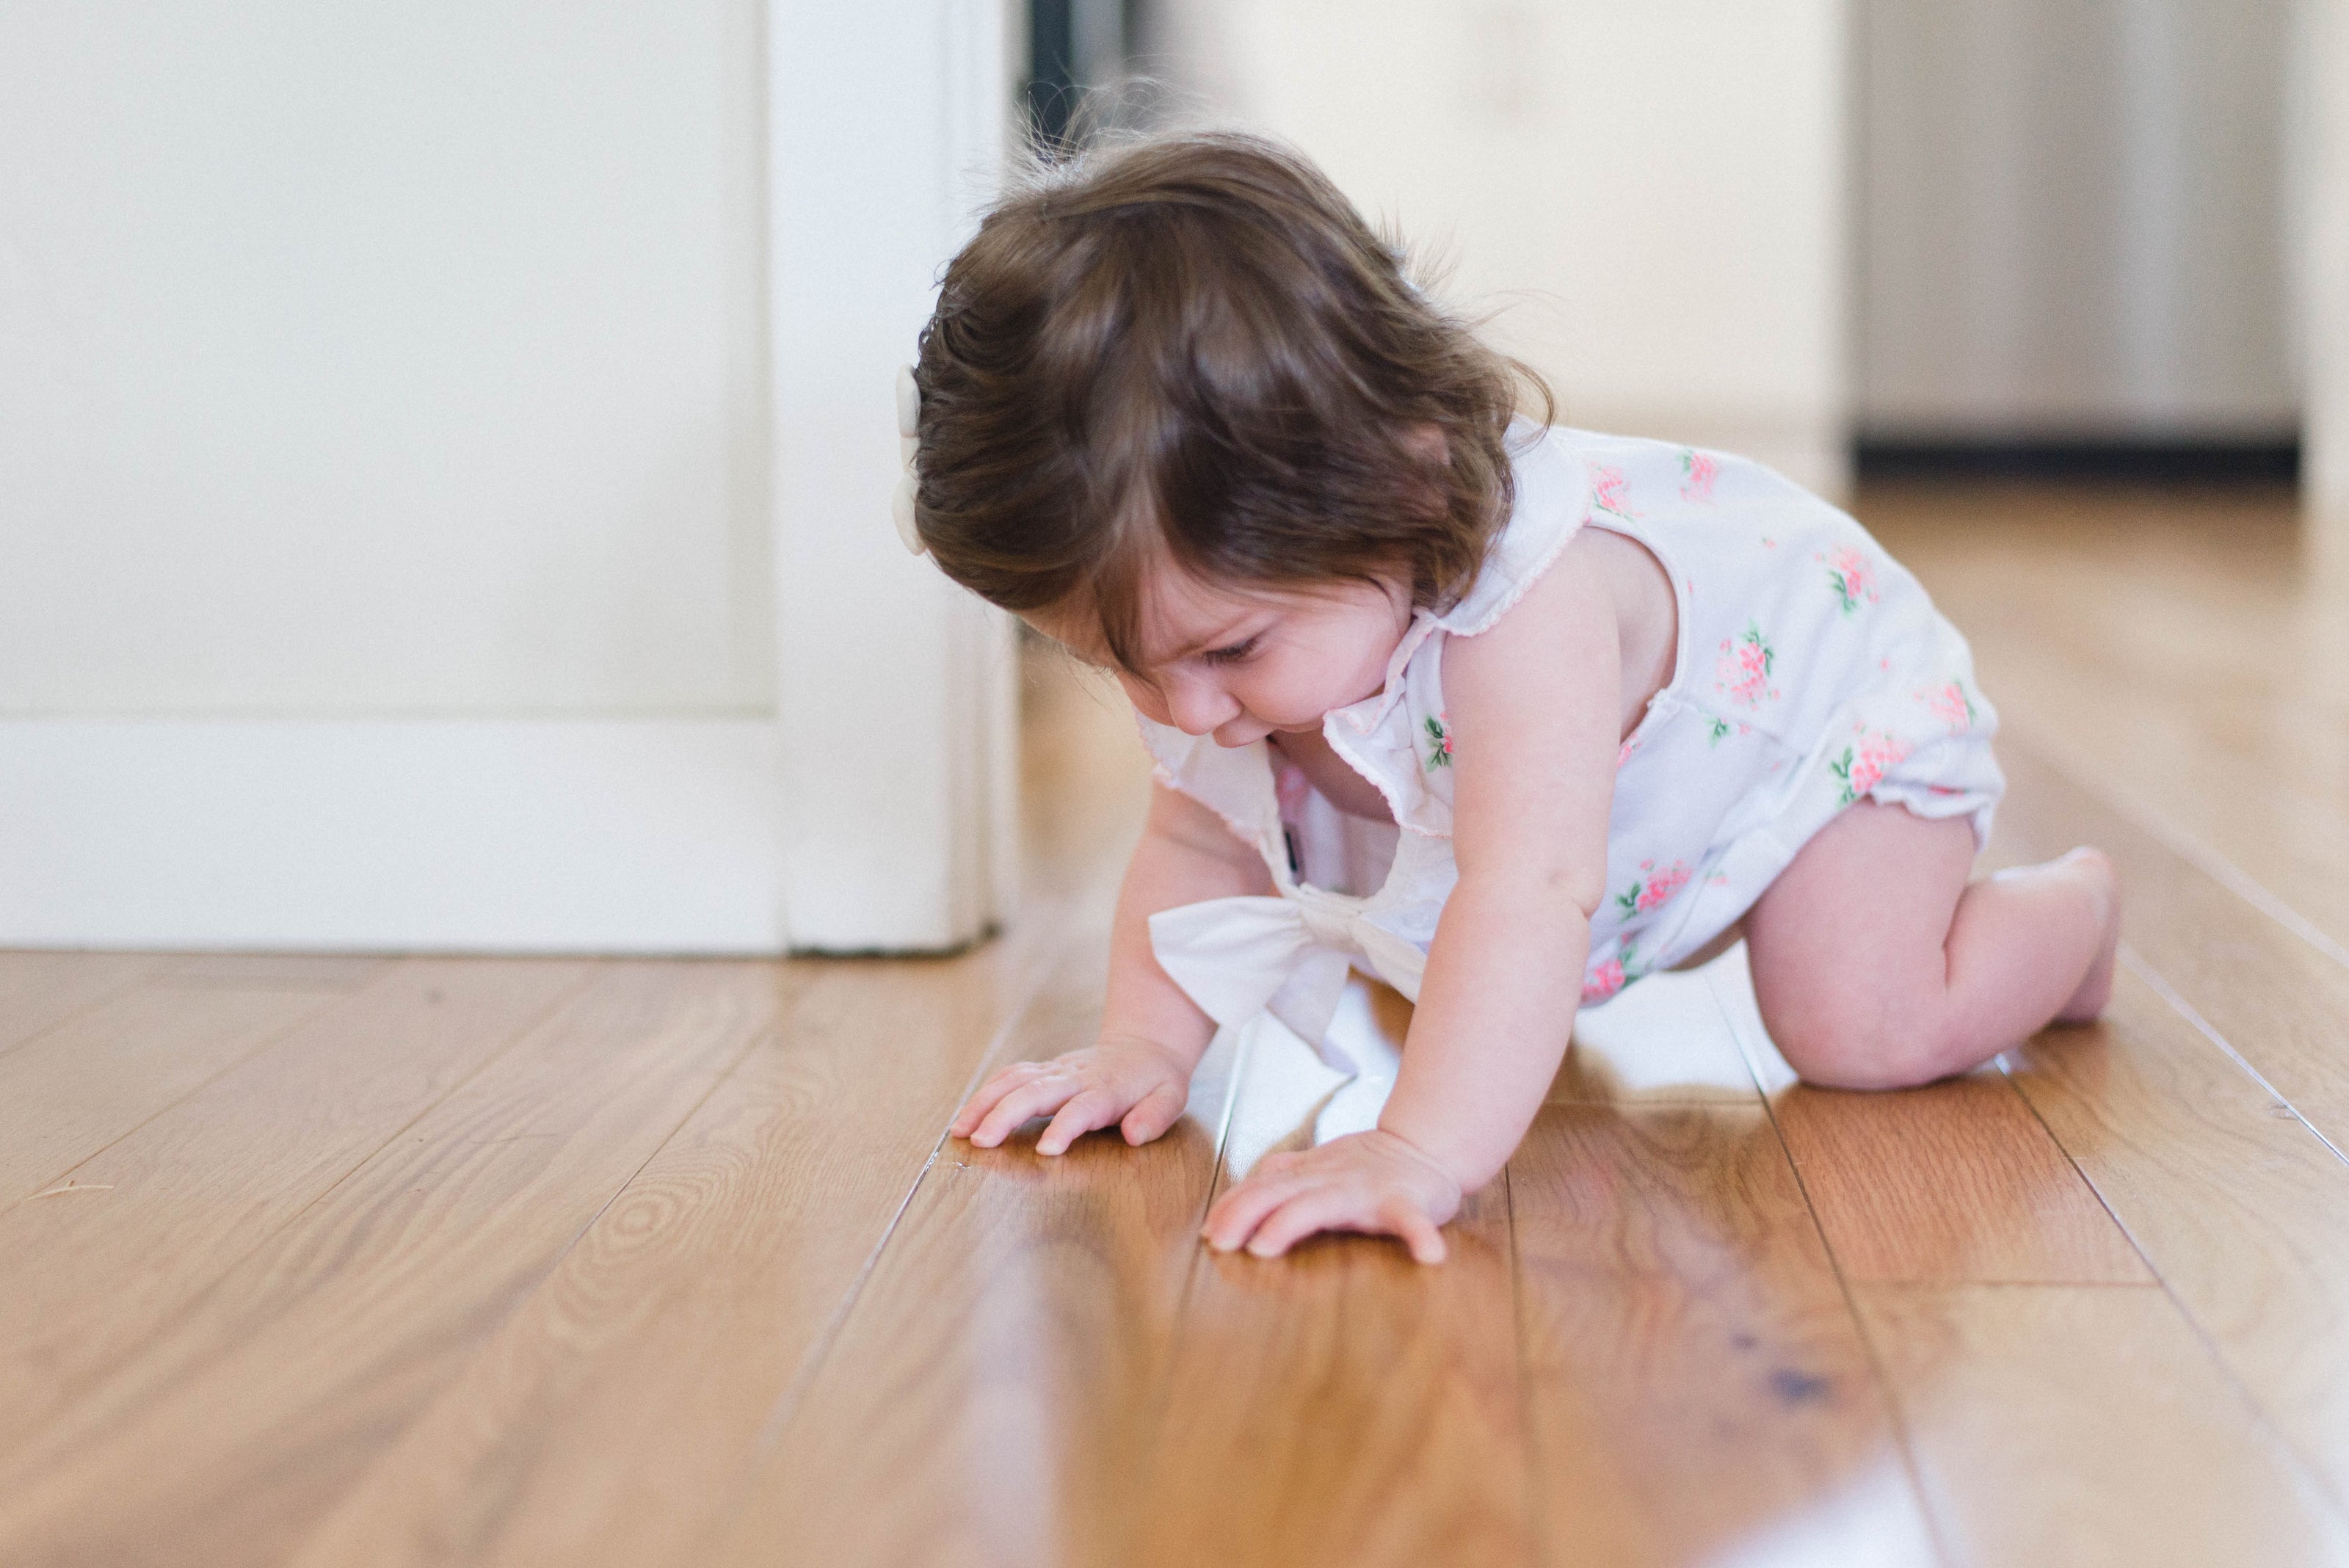 Baby crawling on the floor advertising childproof vent covers